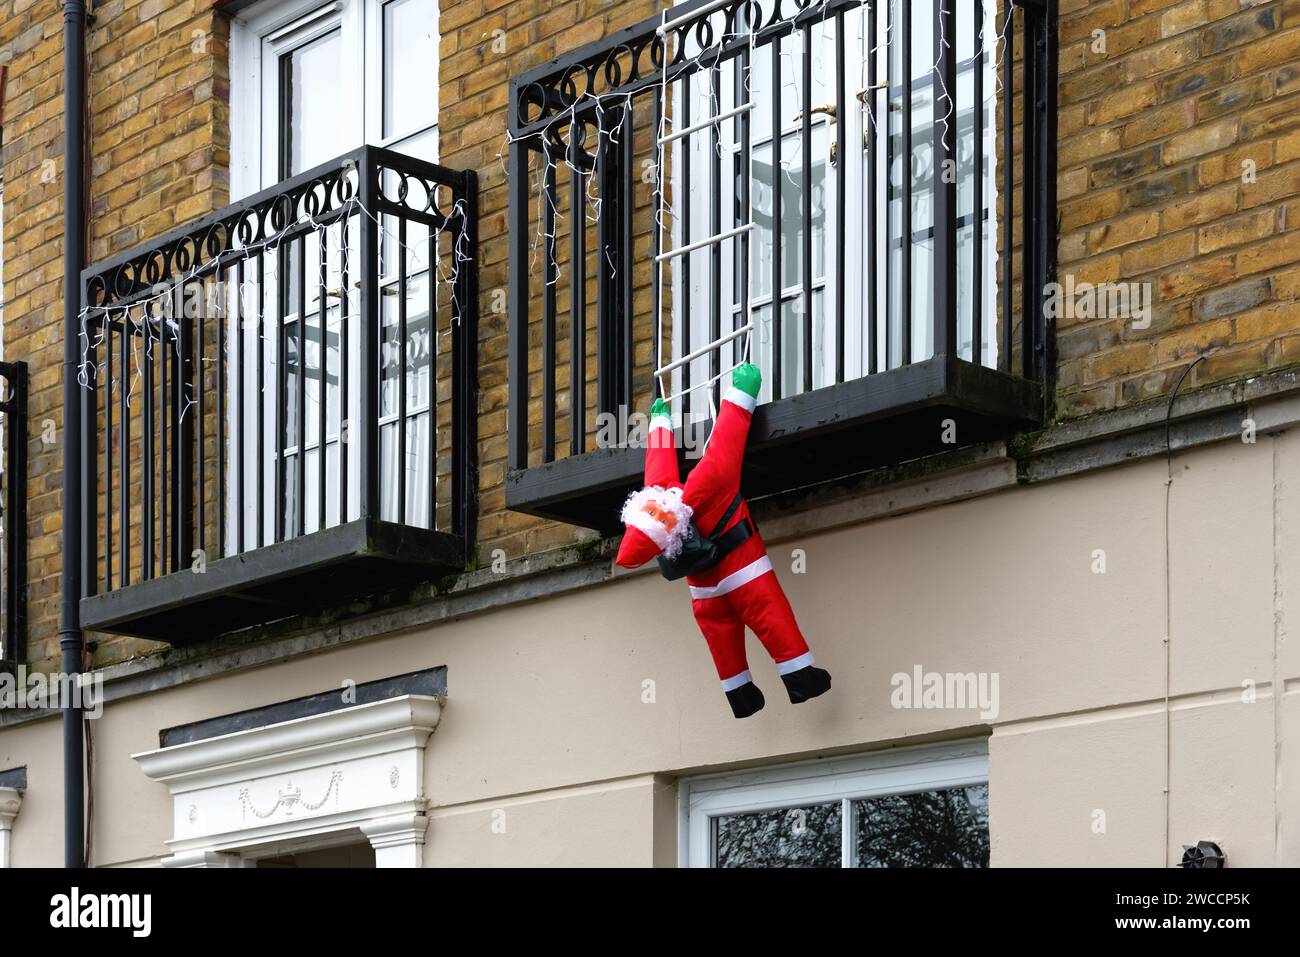 A blow-up Father Christmas hanging off an apartment balcony as if trying to climb up ladder to gain access to the premises, Surrey England UK Stock Photo